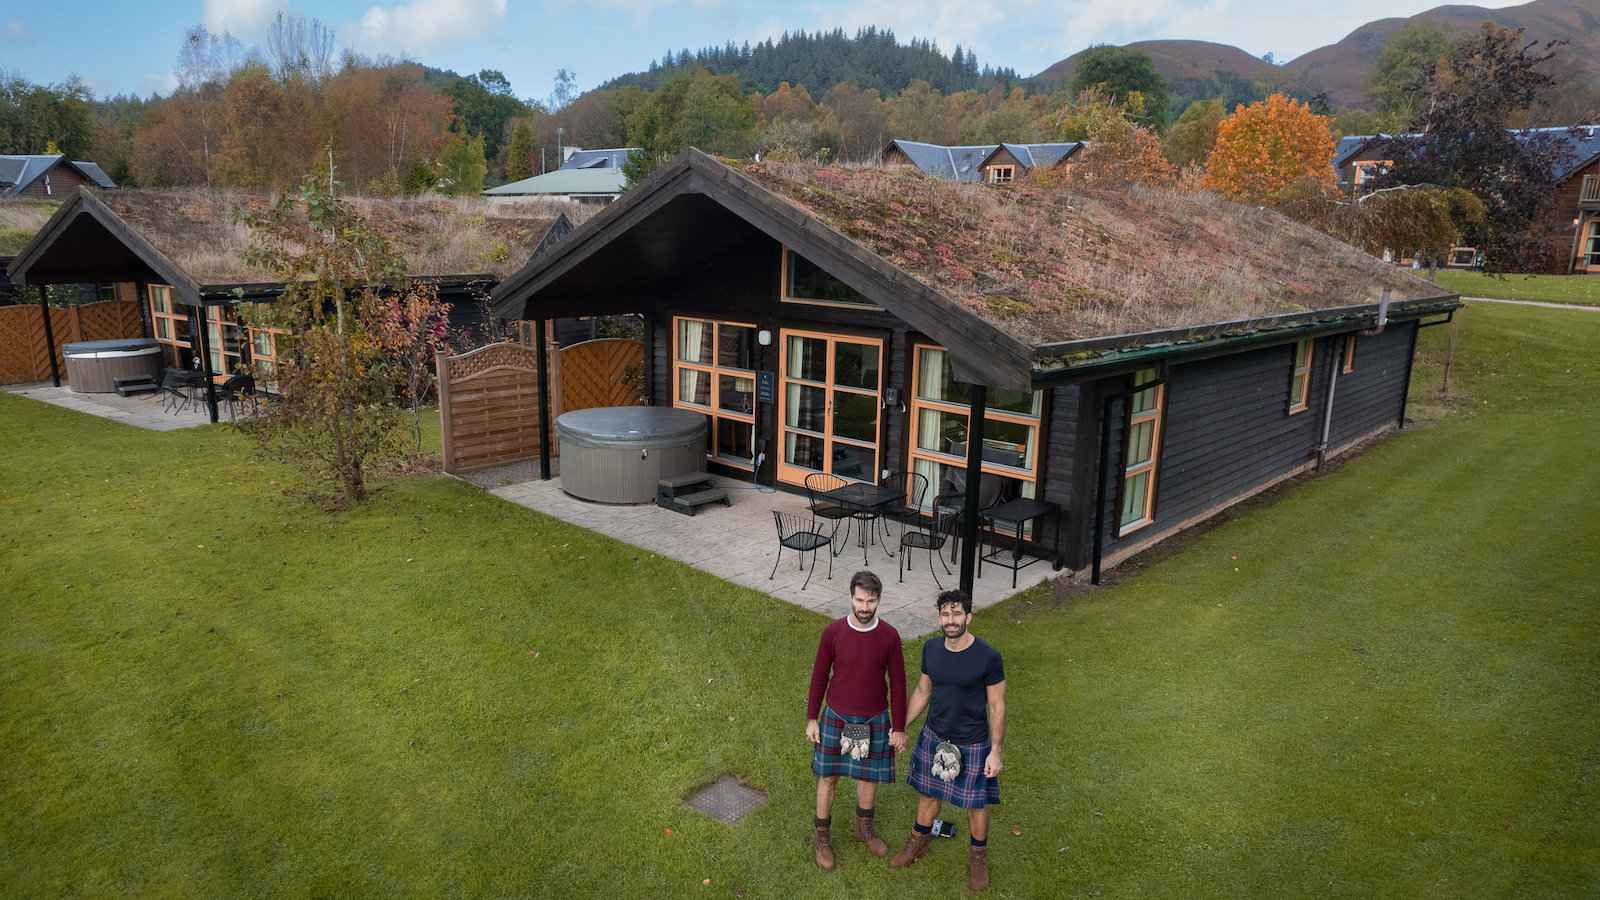 Loch Lomond Luxury Waterfront Lodges are a great gay friendly choice of accommodation in Scotland